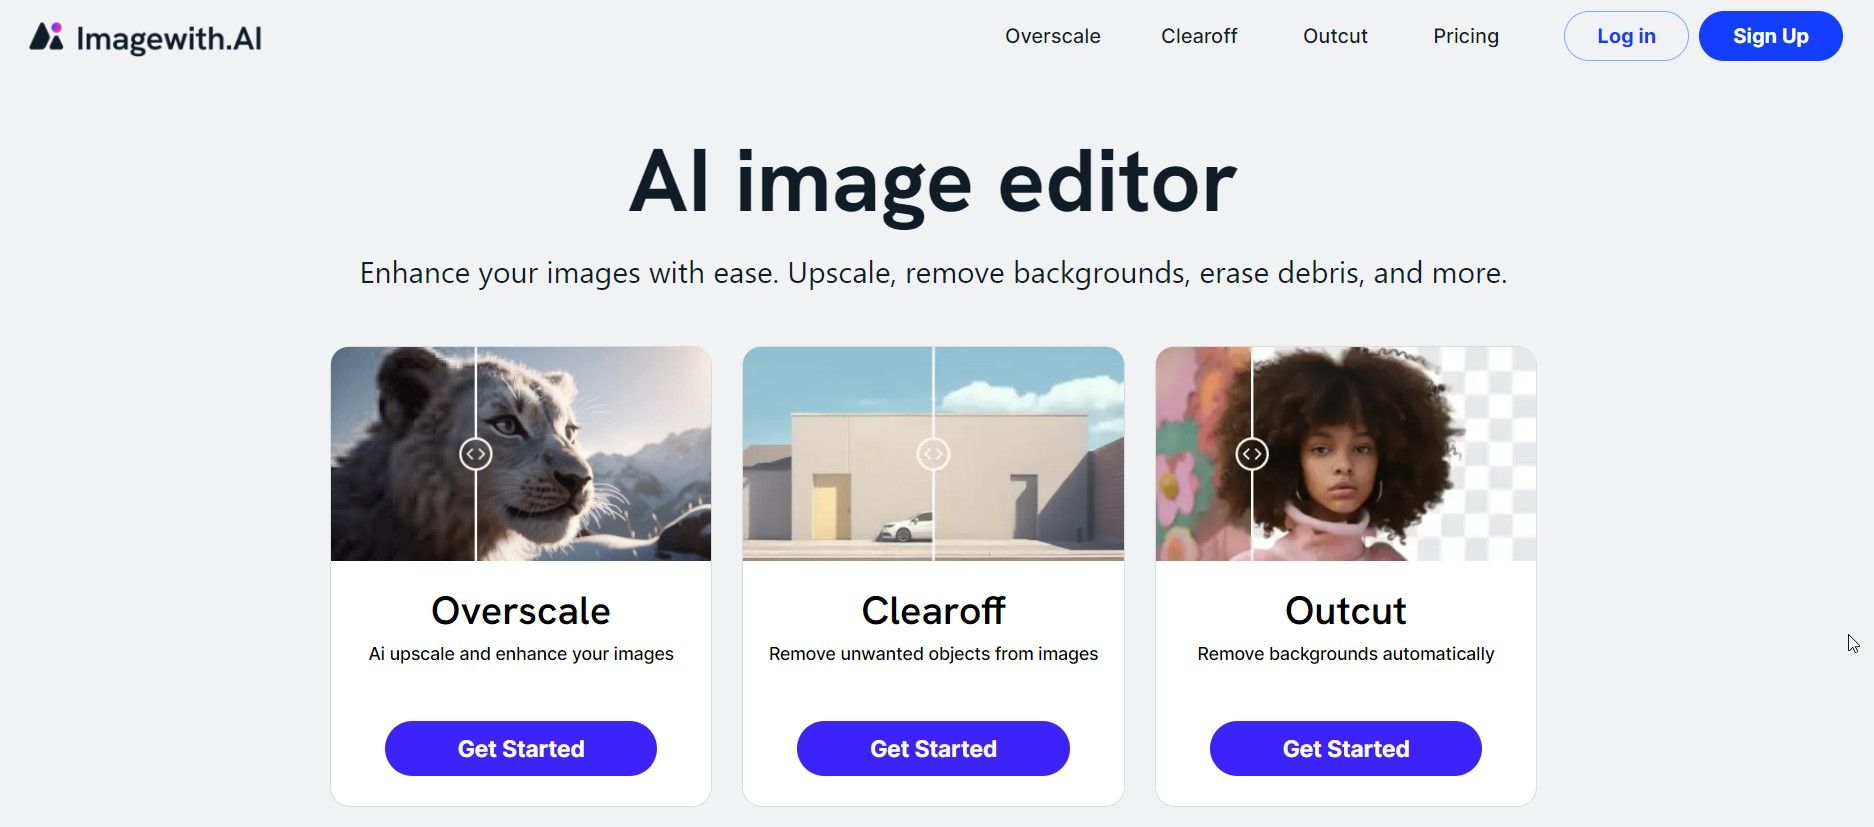 Enhance Your Art Using ImageWith.AI